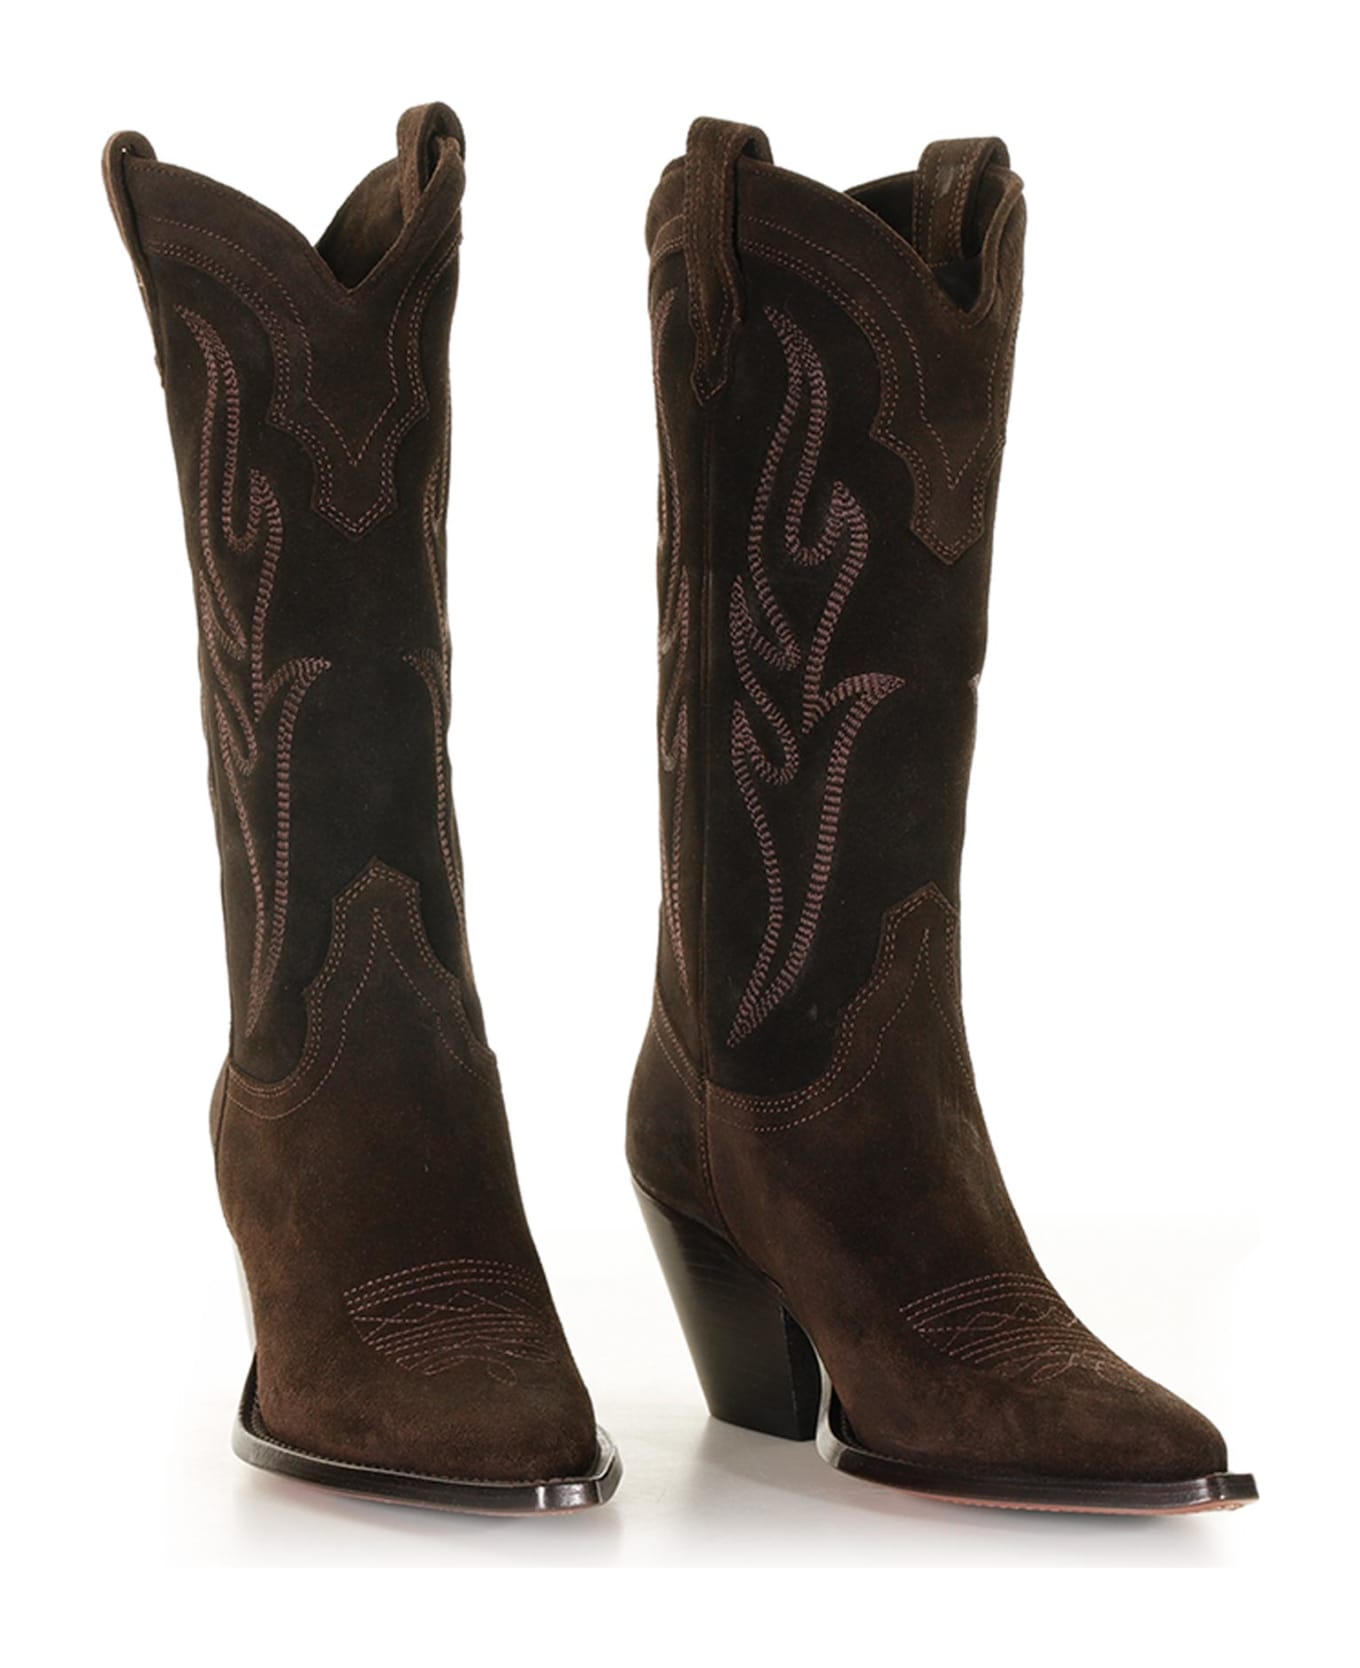 Sonora Santa Fe Cowboy Style Texan Boot In Embroidered Suede - BROWN